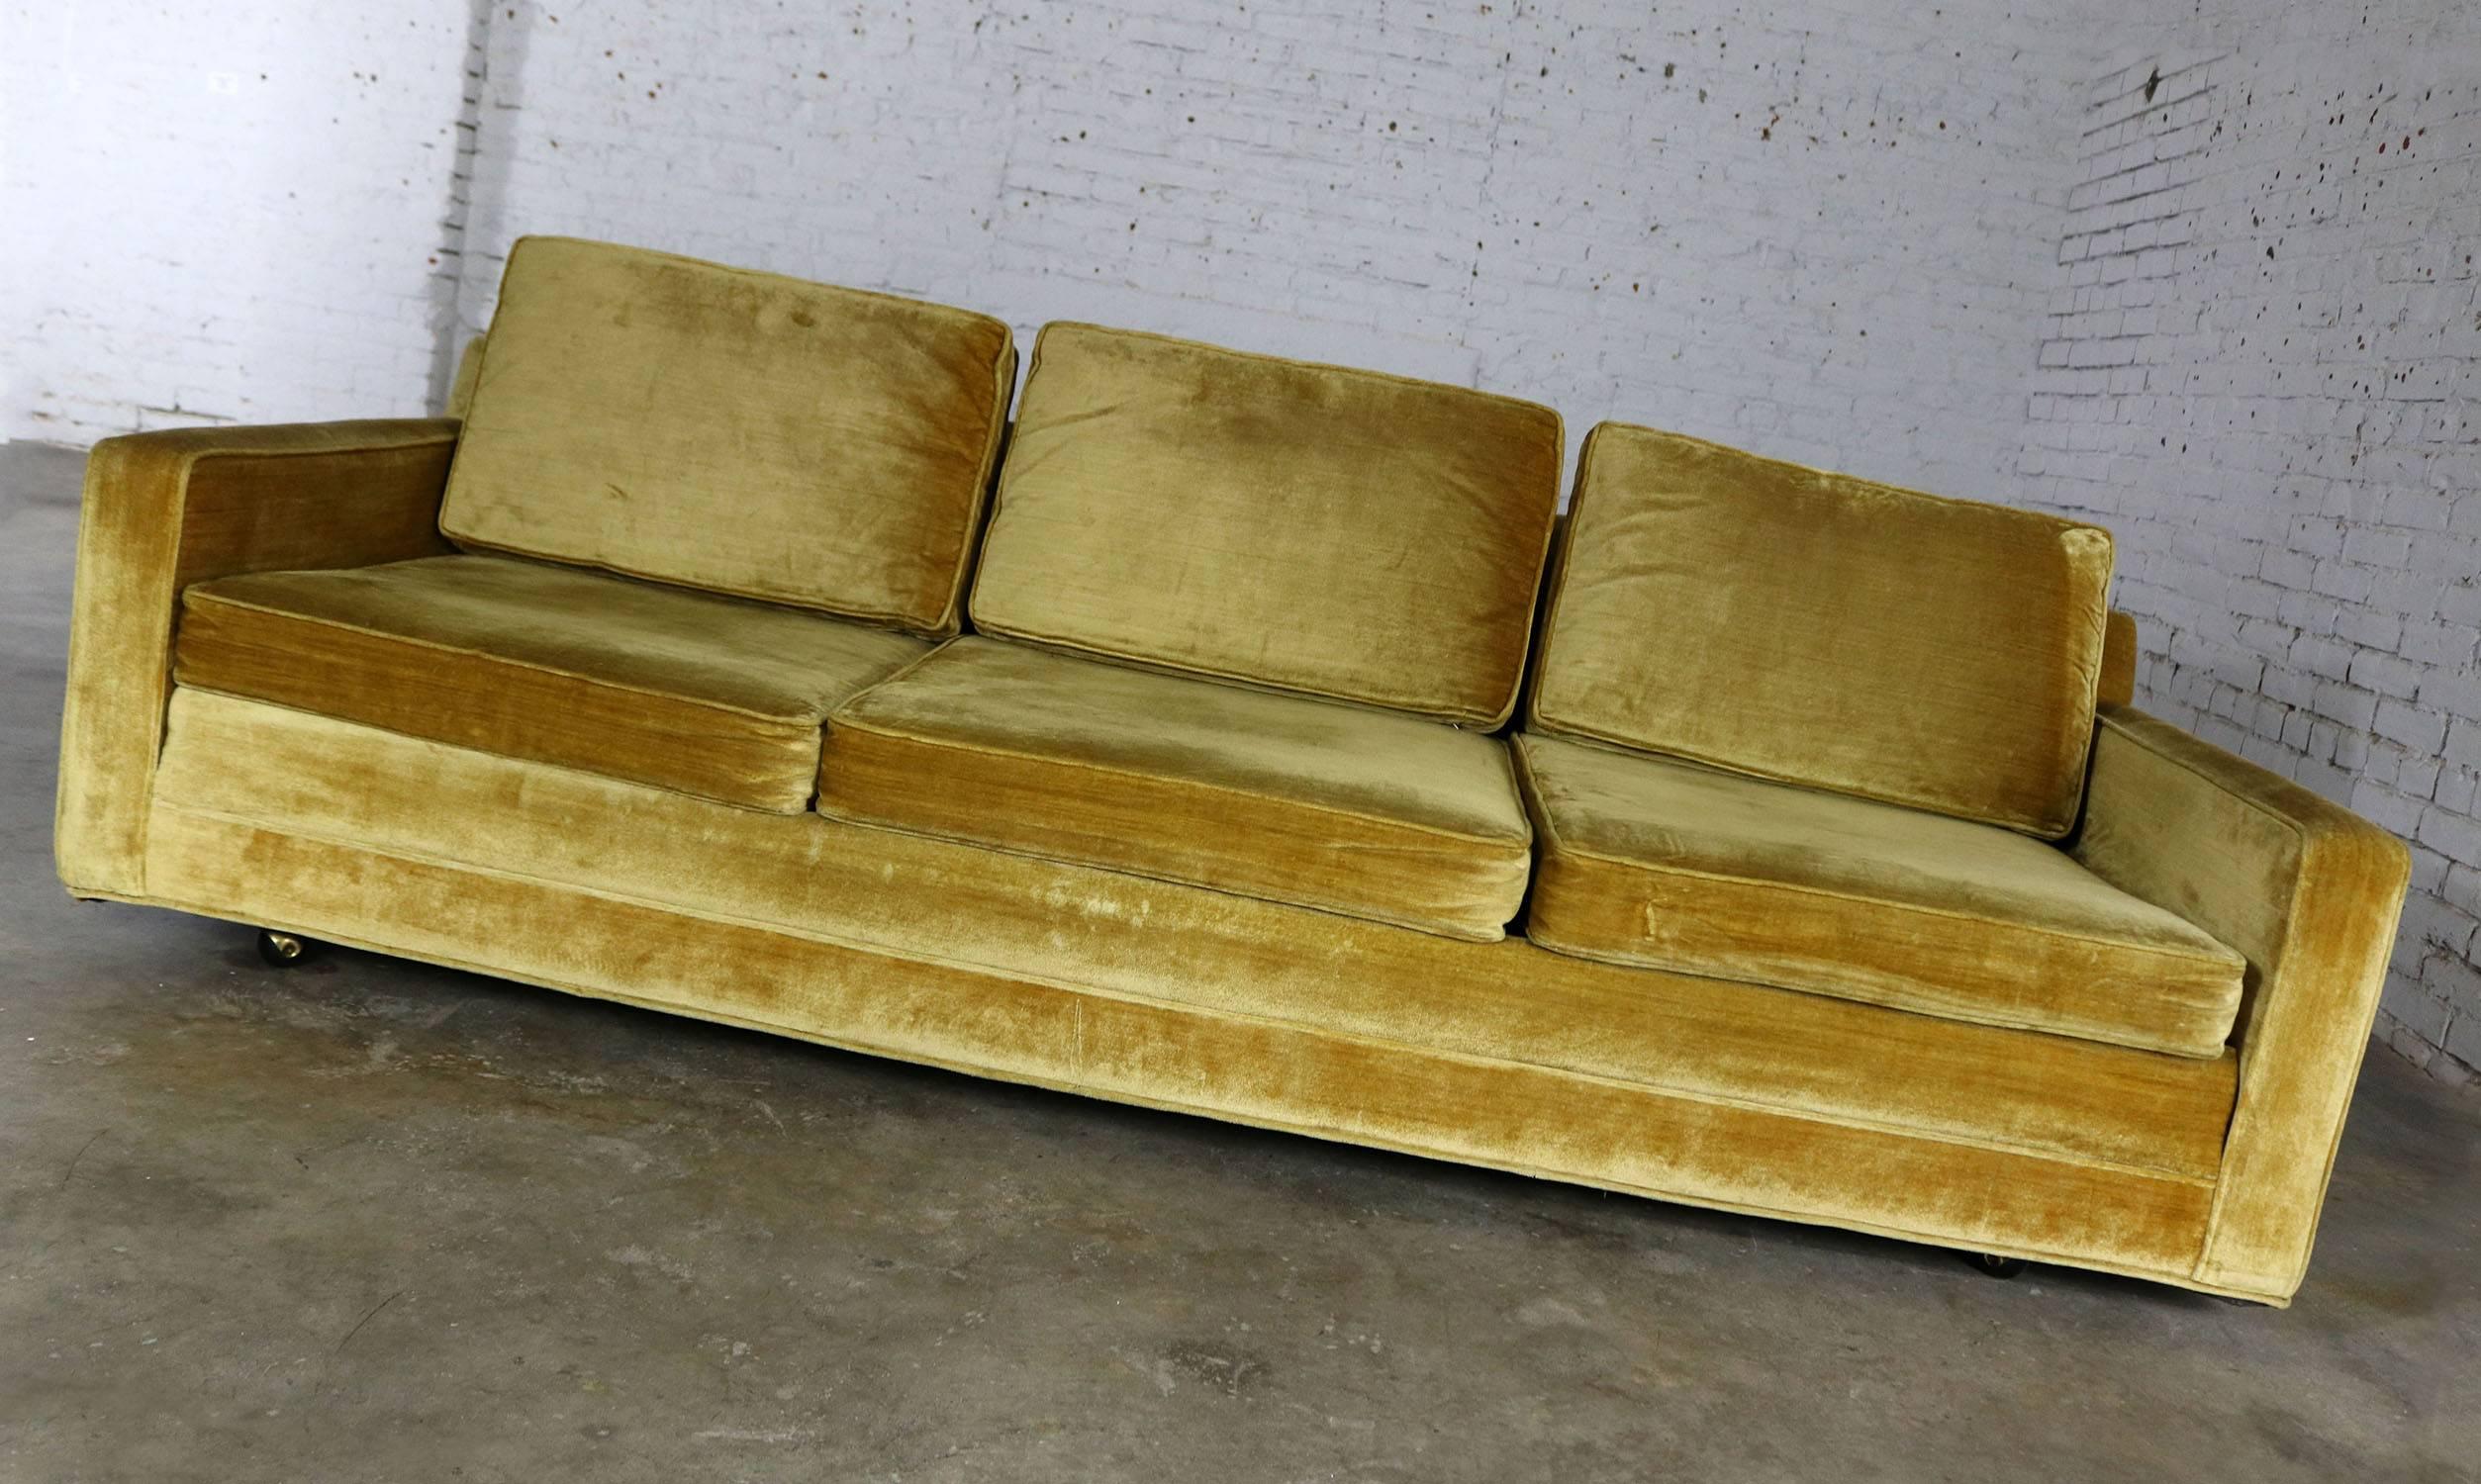 Slender and simple Lawson style three-cushion sofa in gold velvet upholstery. This vintage sofa is circa 1960s and in wonderful condition. The foam is soft in the cushions and the fabric is like-new although there is a minor wear to the bottom